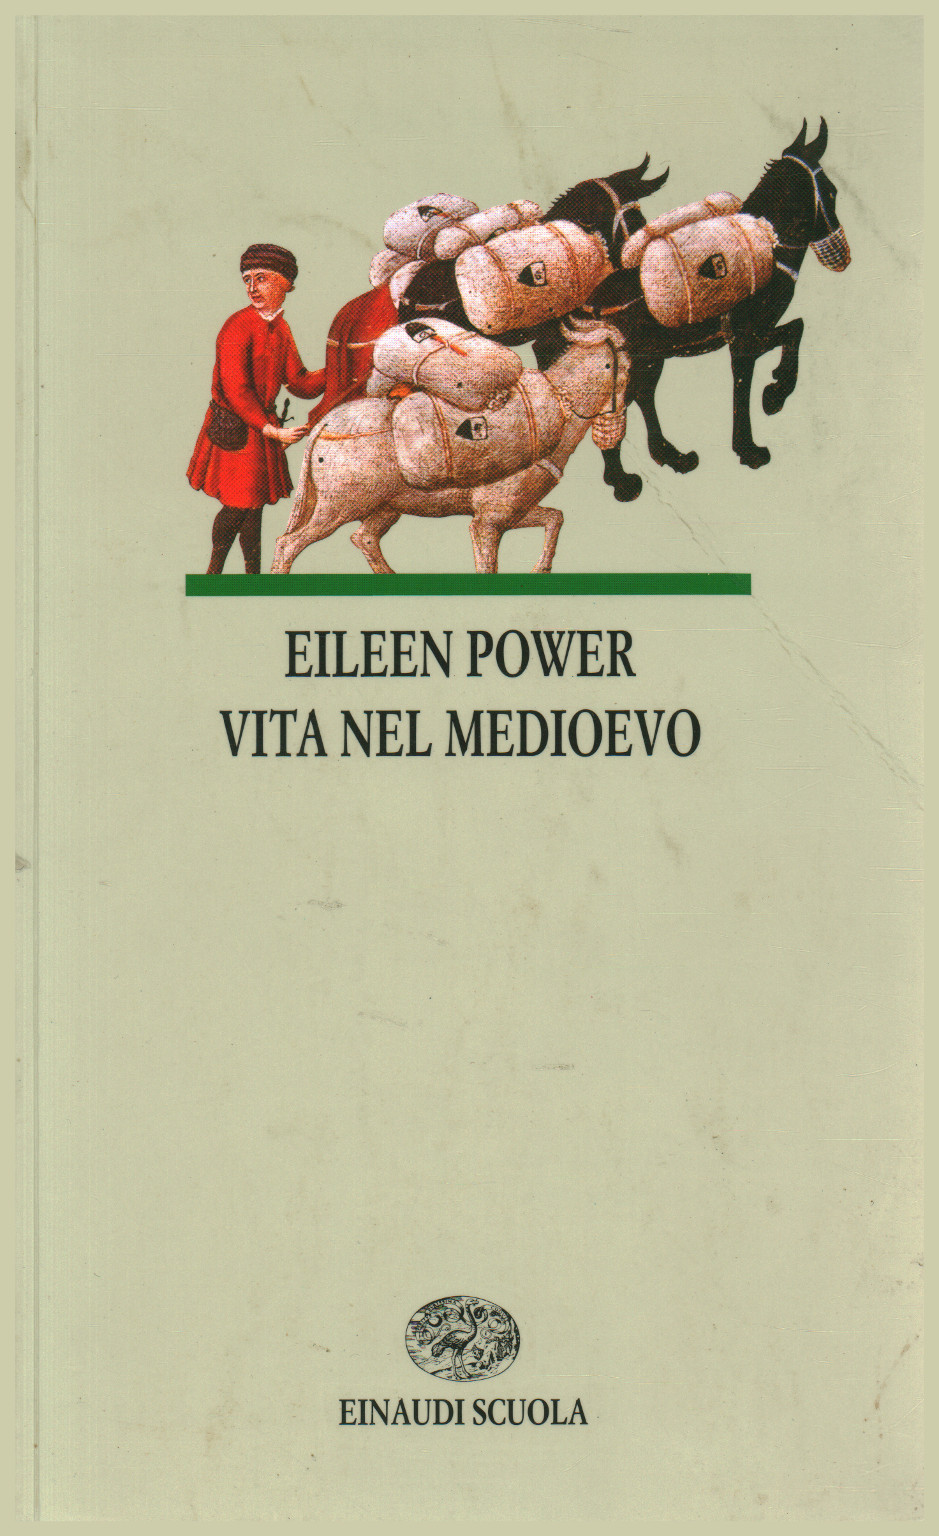 Life in the Middle Ages, Eileen Power